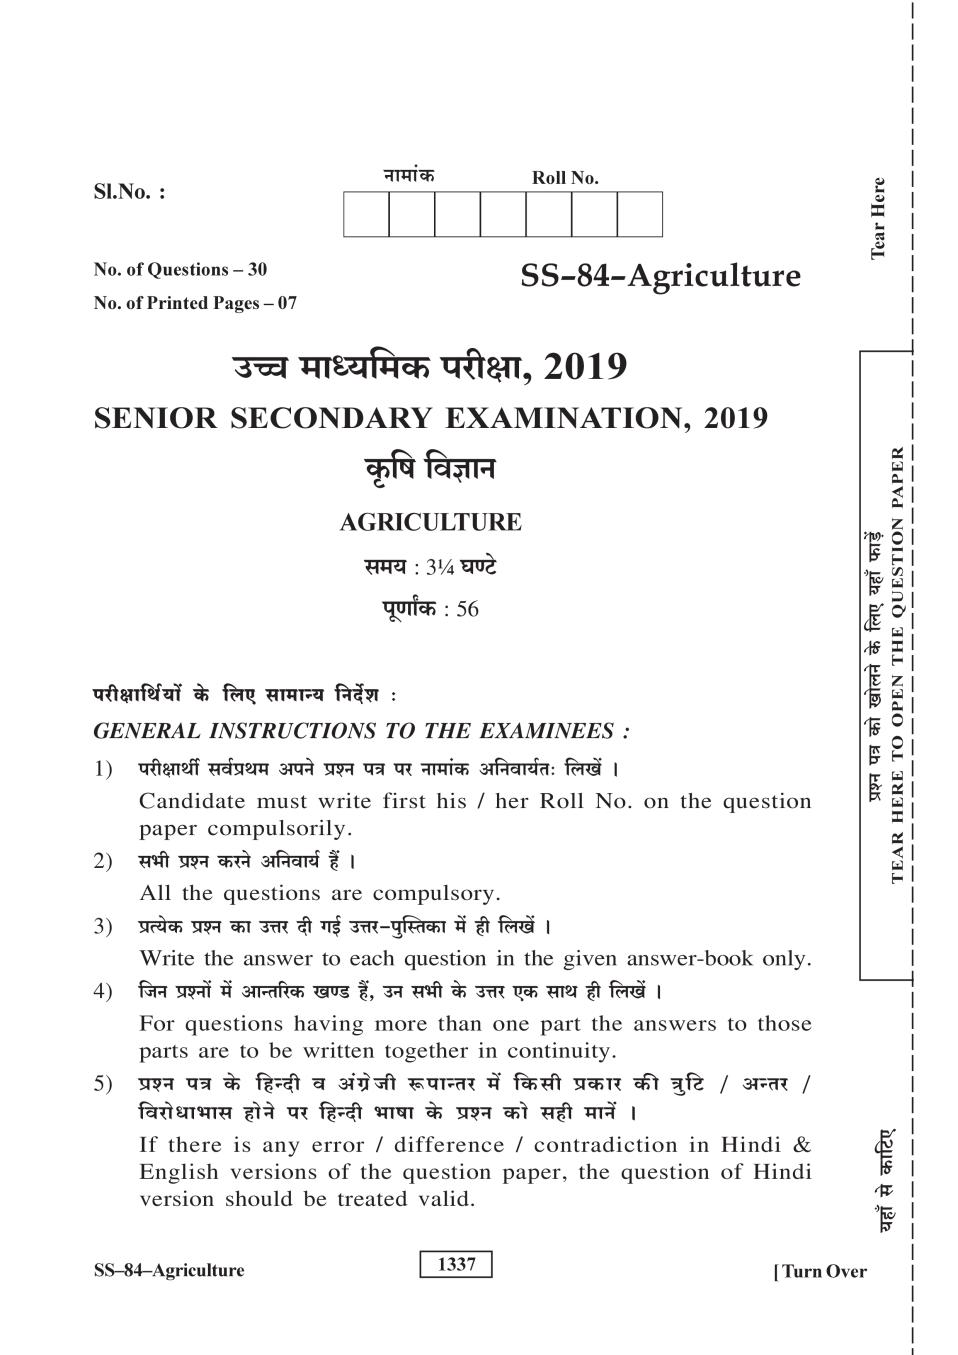 Rajasthan Board 12th Class Agriculture Question Paper 2019 - Page 1